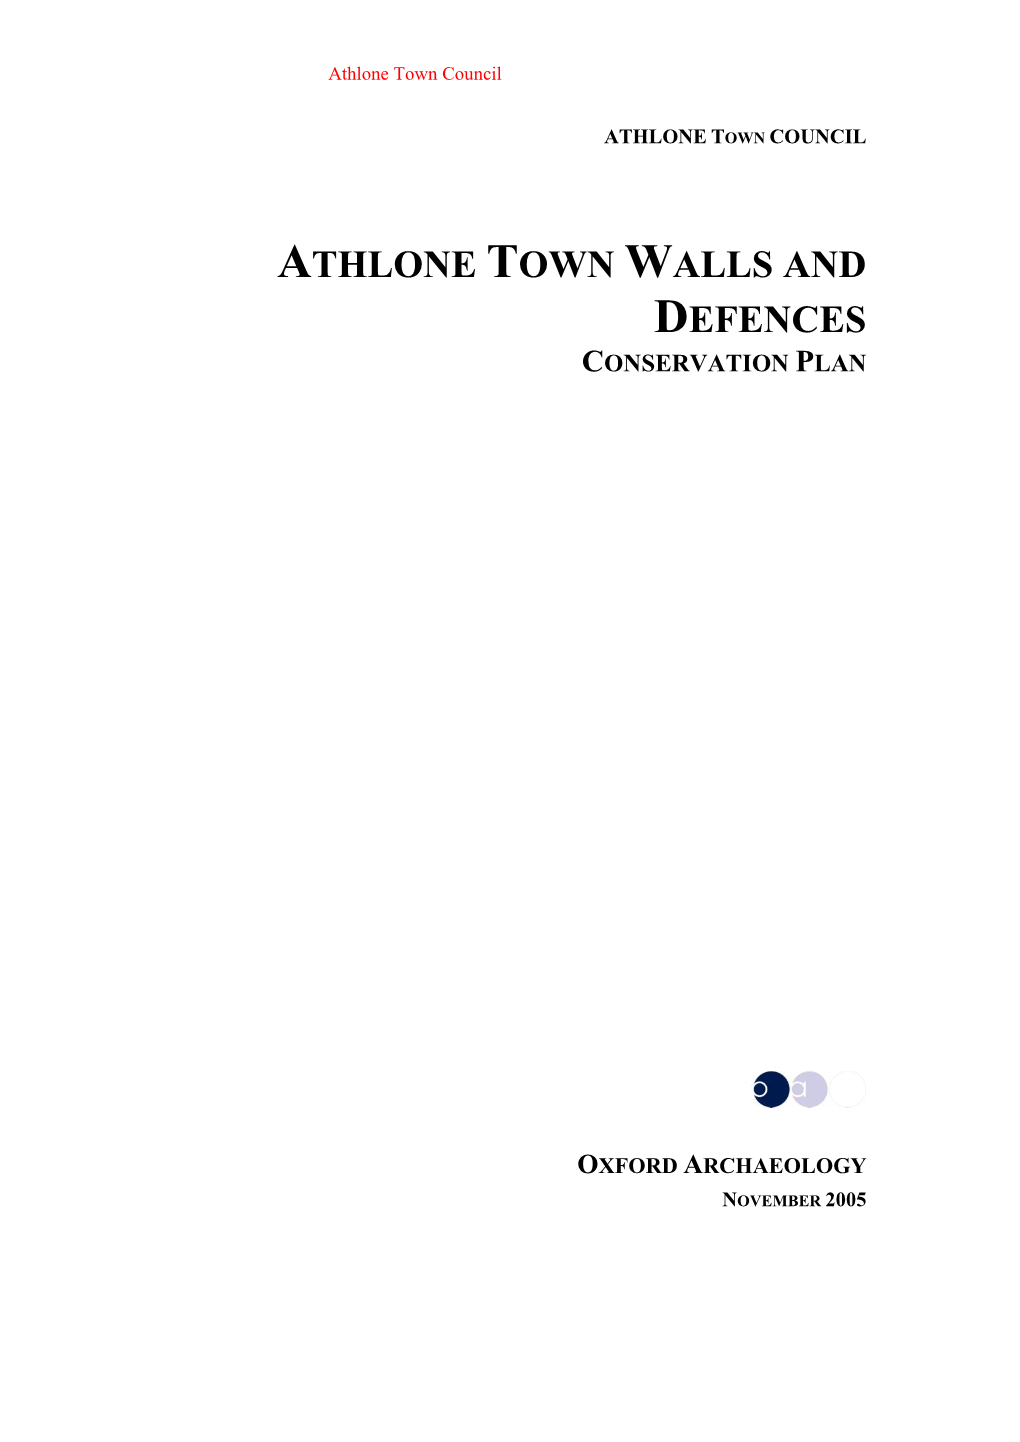 Athlone Town Walls and Defences Conservation Plan